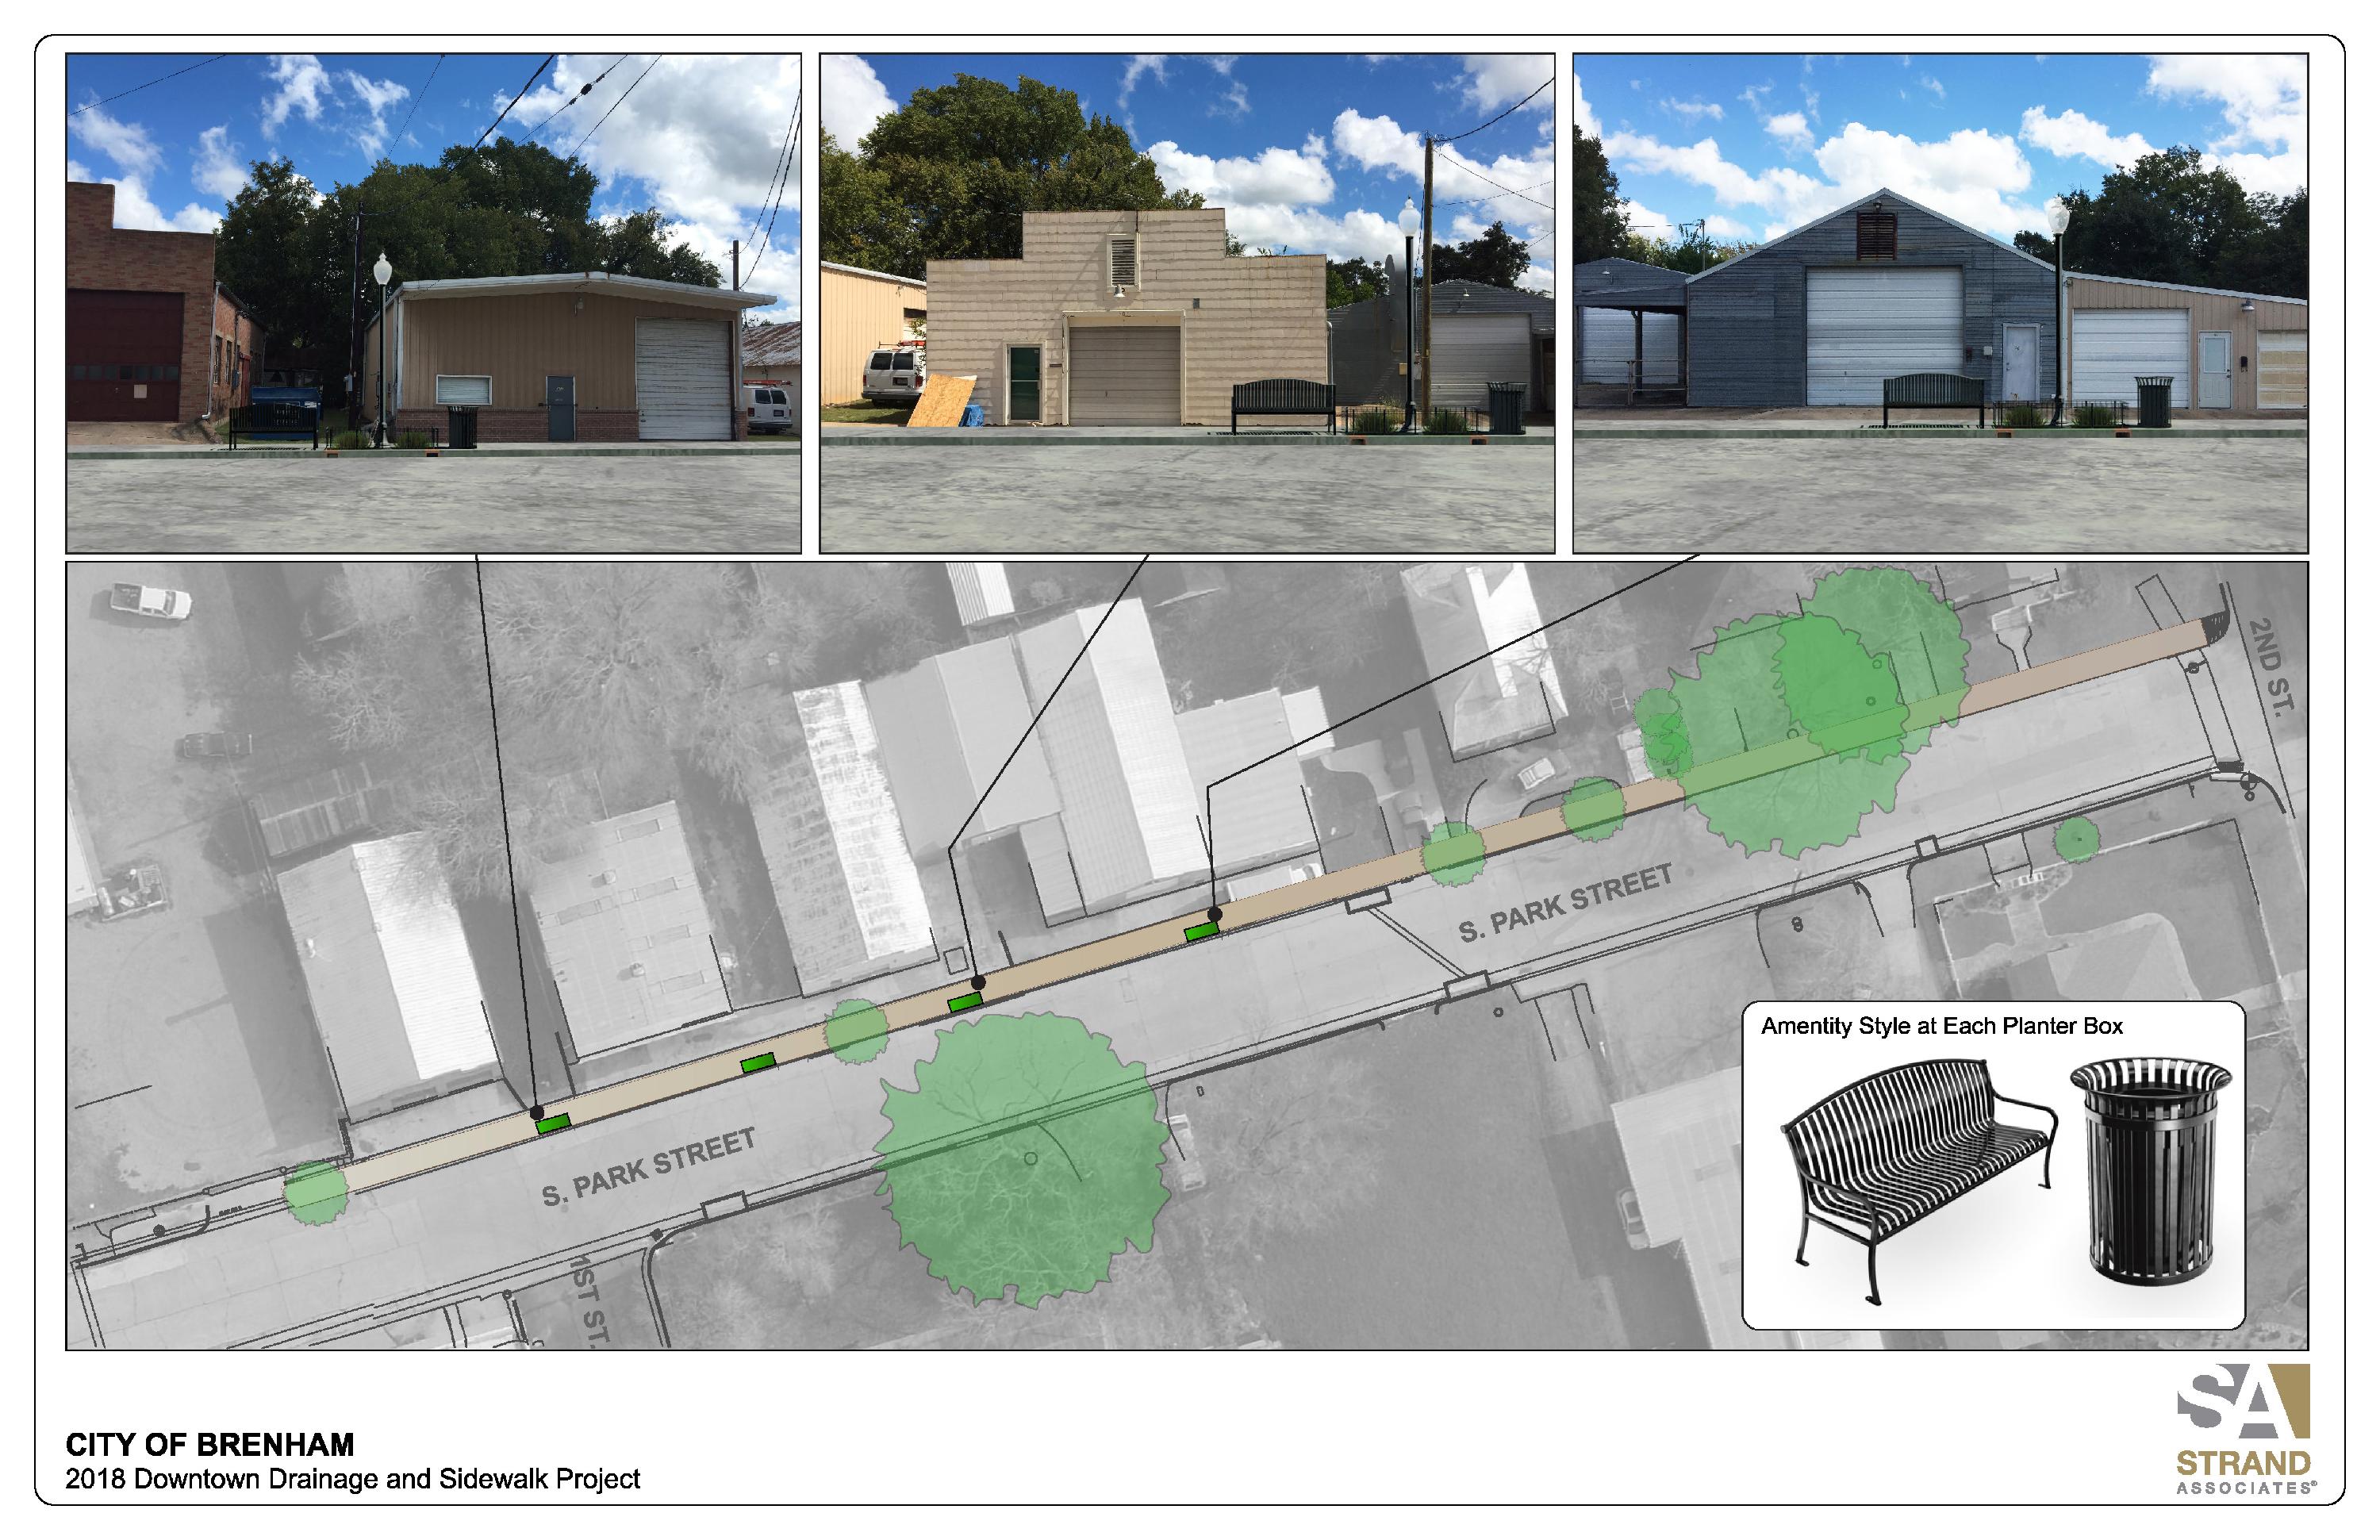 Brenham-2018 Downtown Drainage and Sidewalk Project